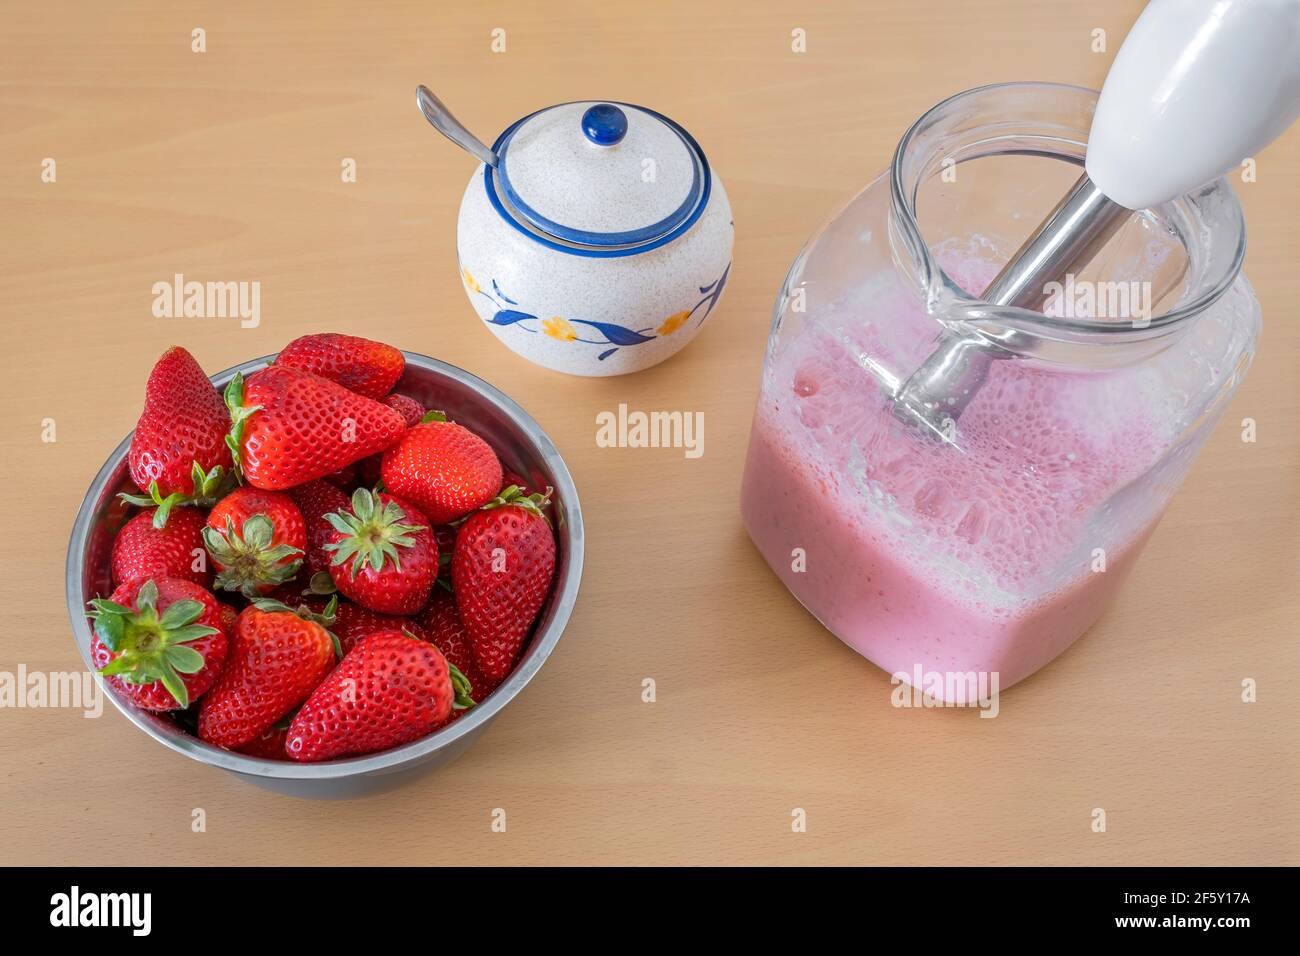 bowl full of strawberries and a pitcher with freshly made strawberry milkshake, a sugar bowl with a spoon inside, a hand blender in the pitcher Stock Photo